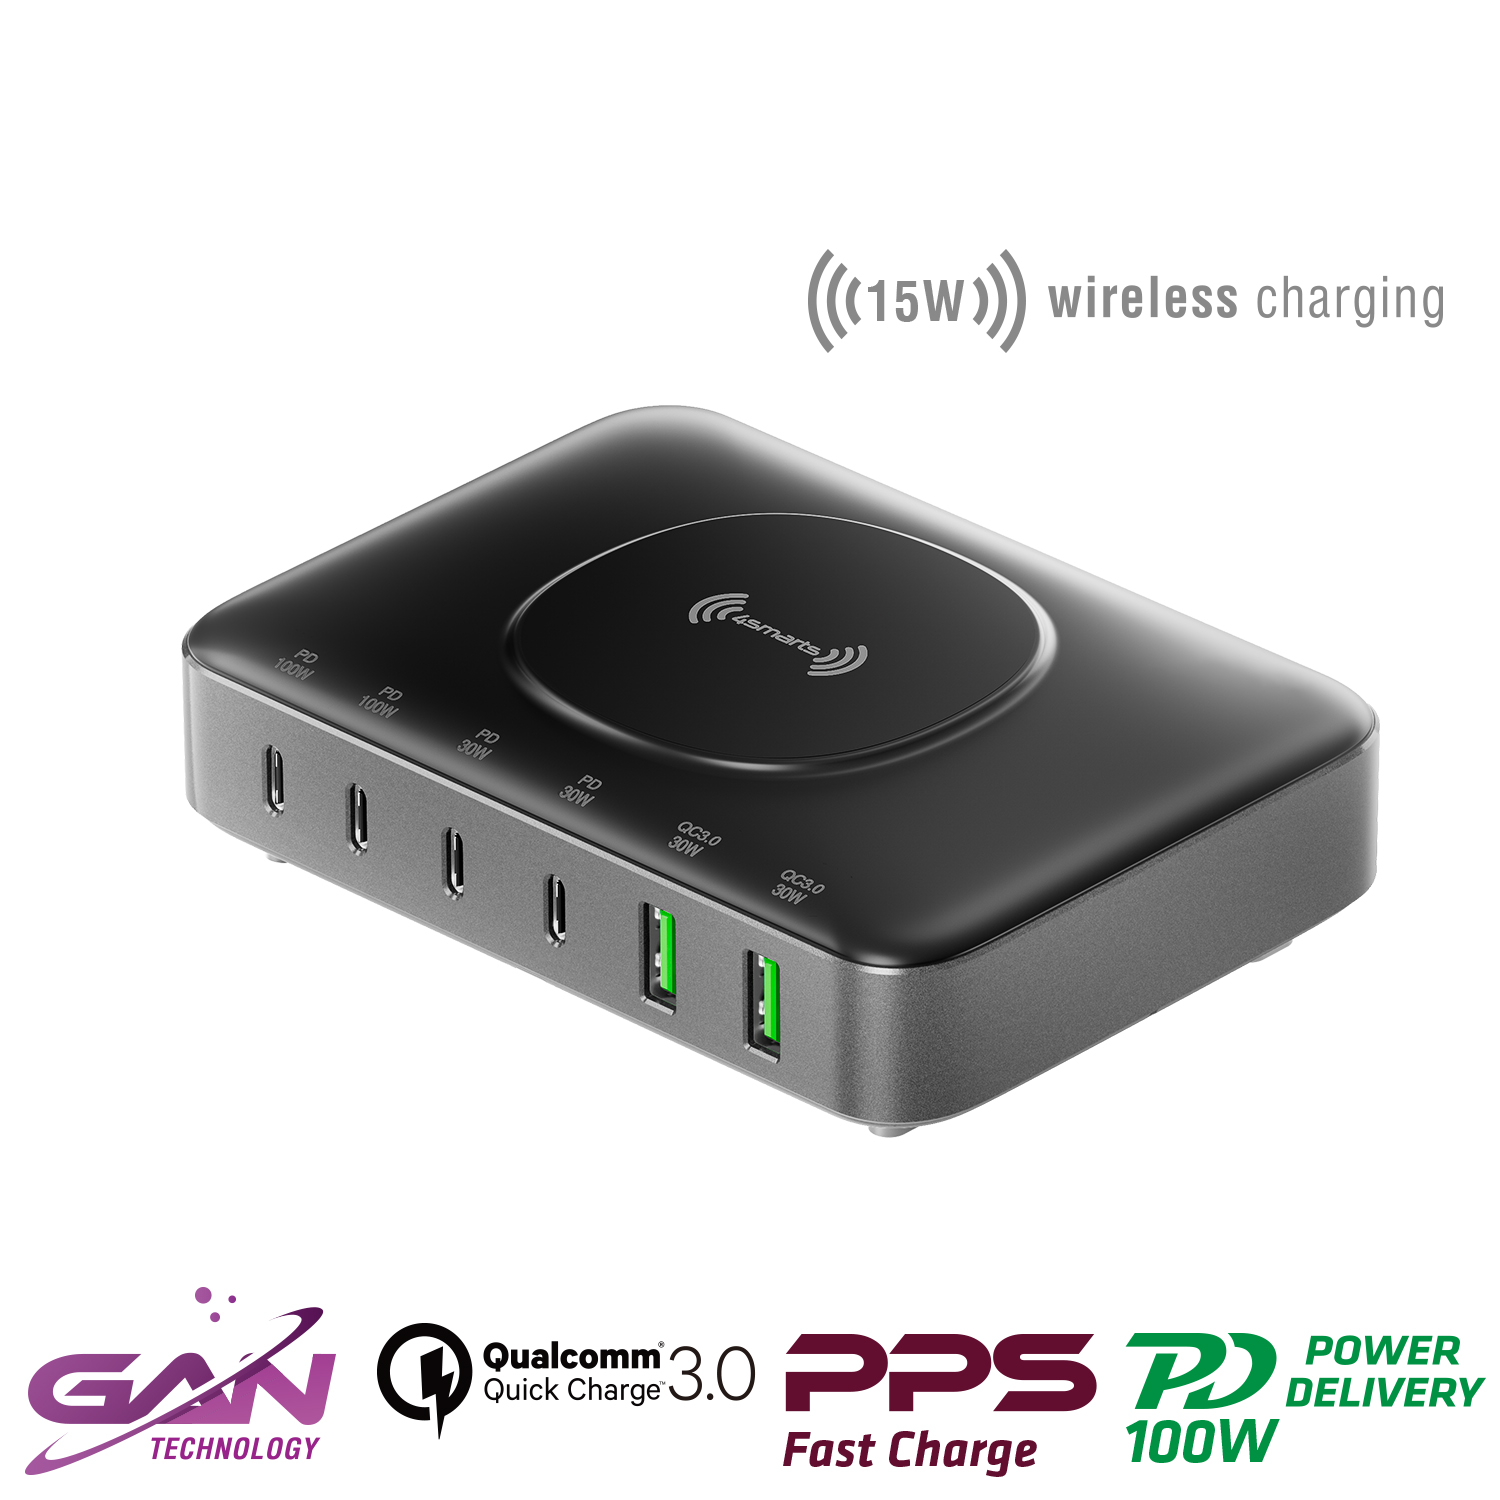 Charge your devices efficiently, wirelessly and quickly with the 4smarts 7in1 GaN charging station.